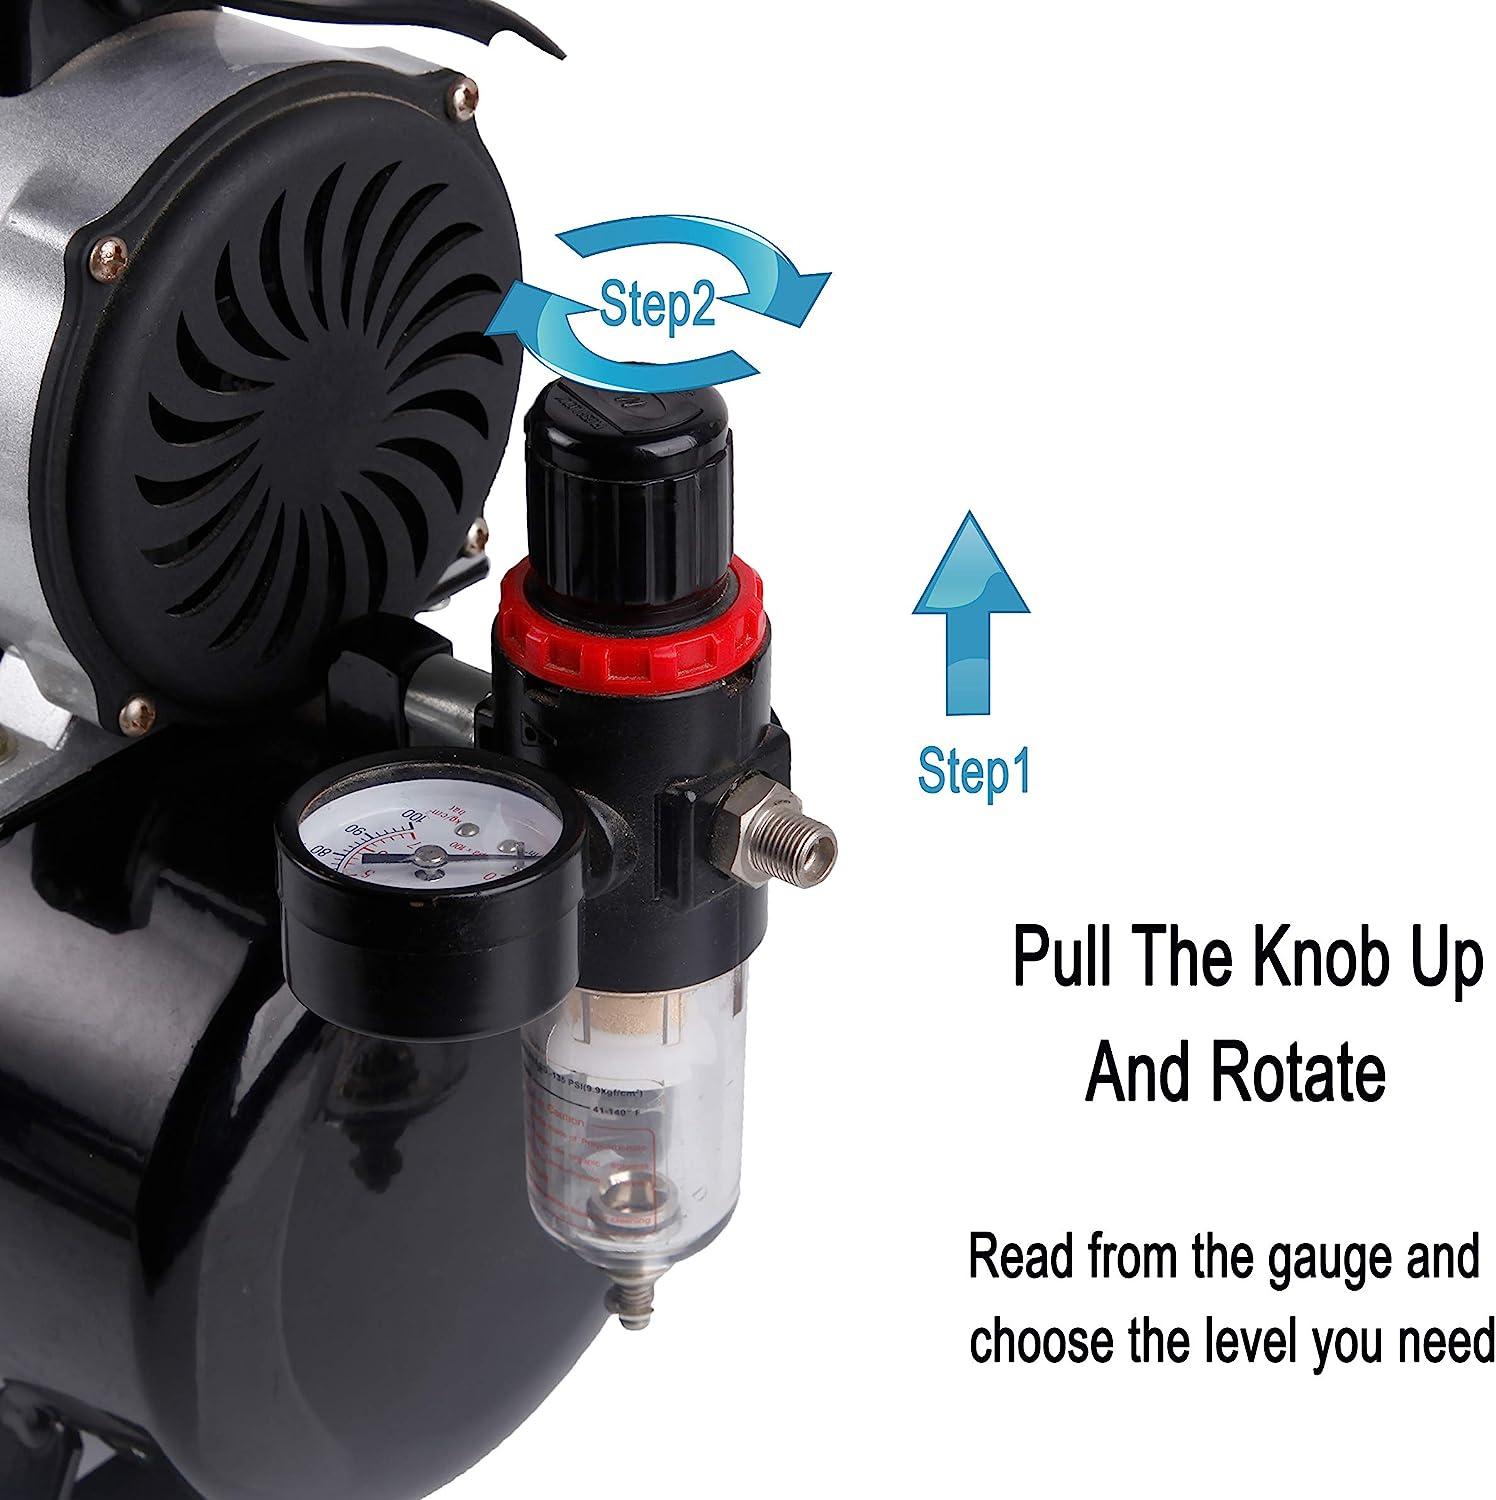 How To Empty Moisture Trap On Timbertech Airbrush Compressor